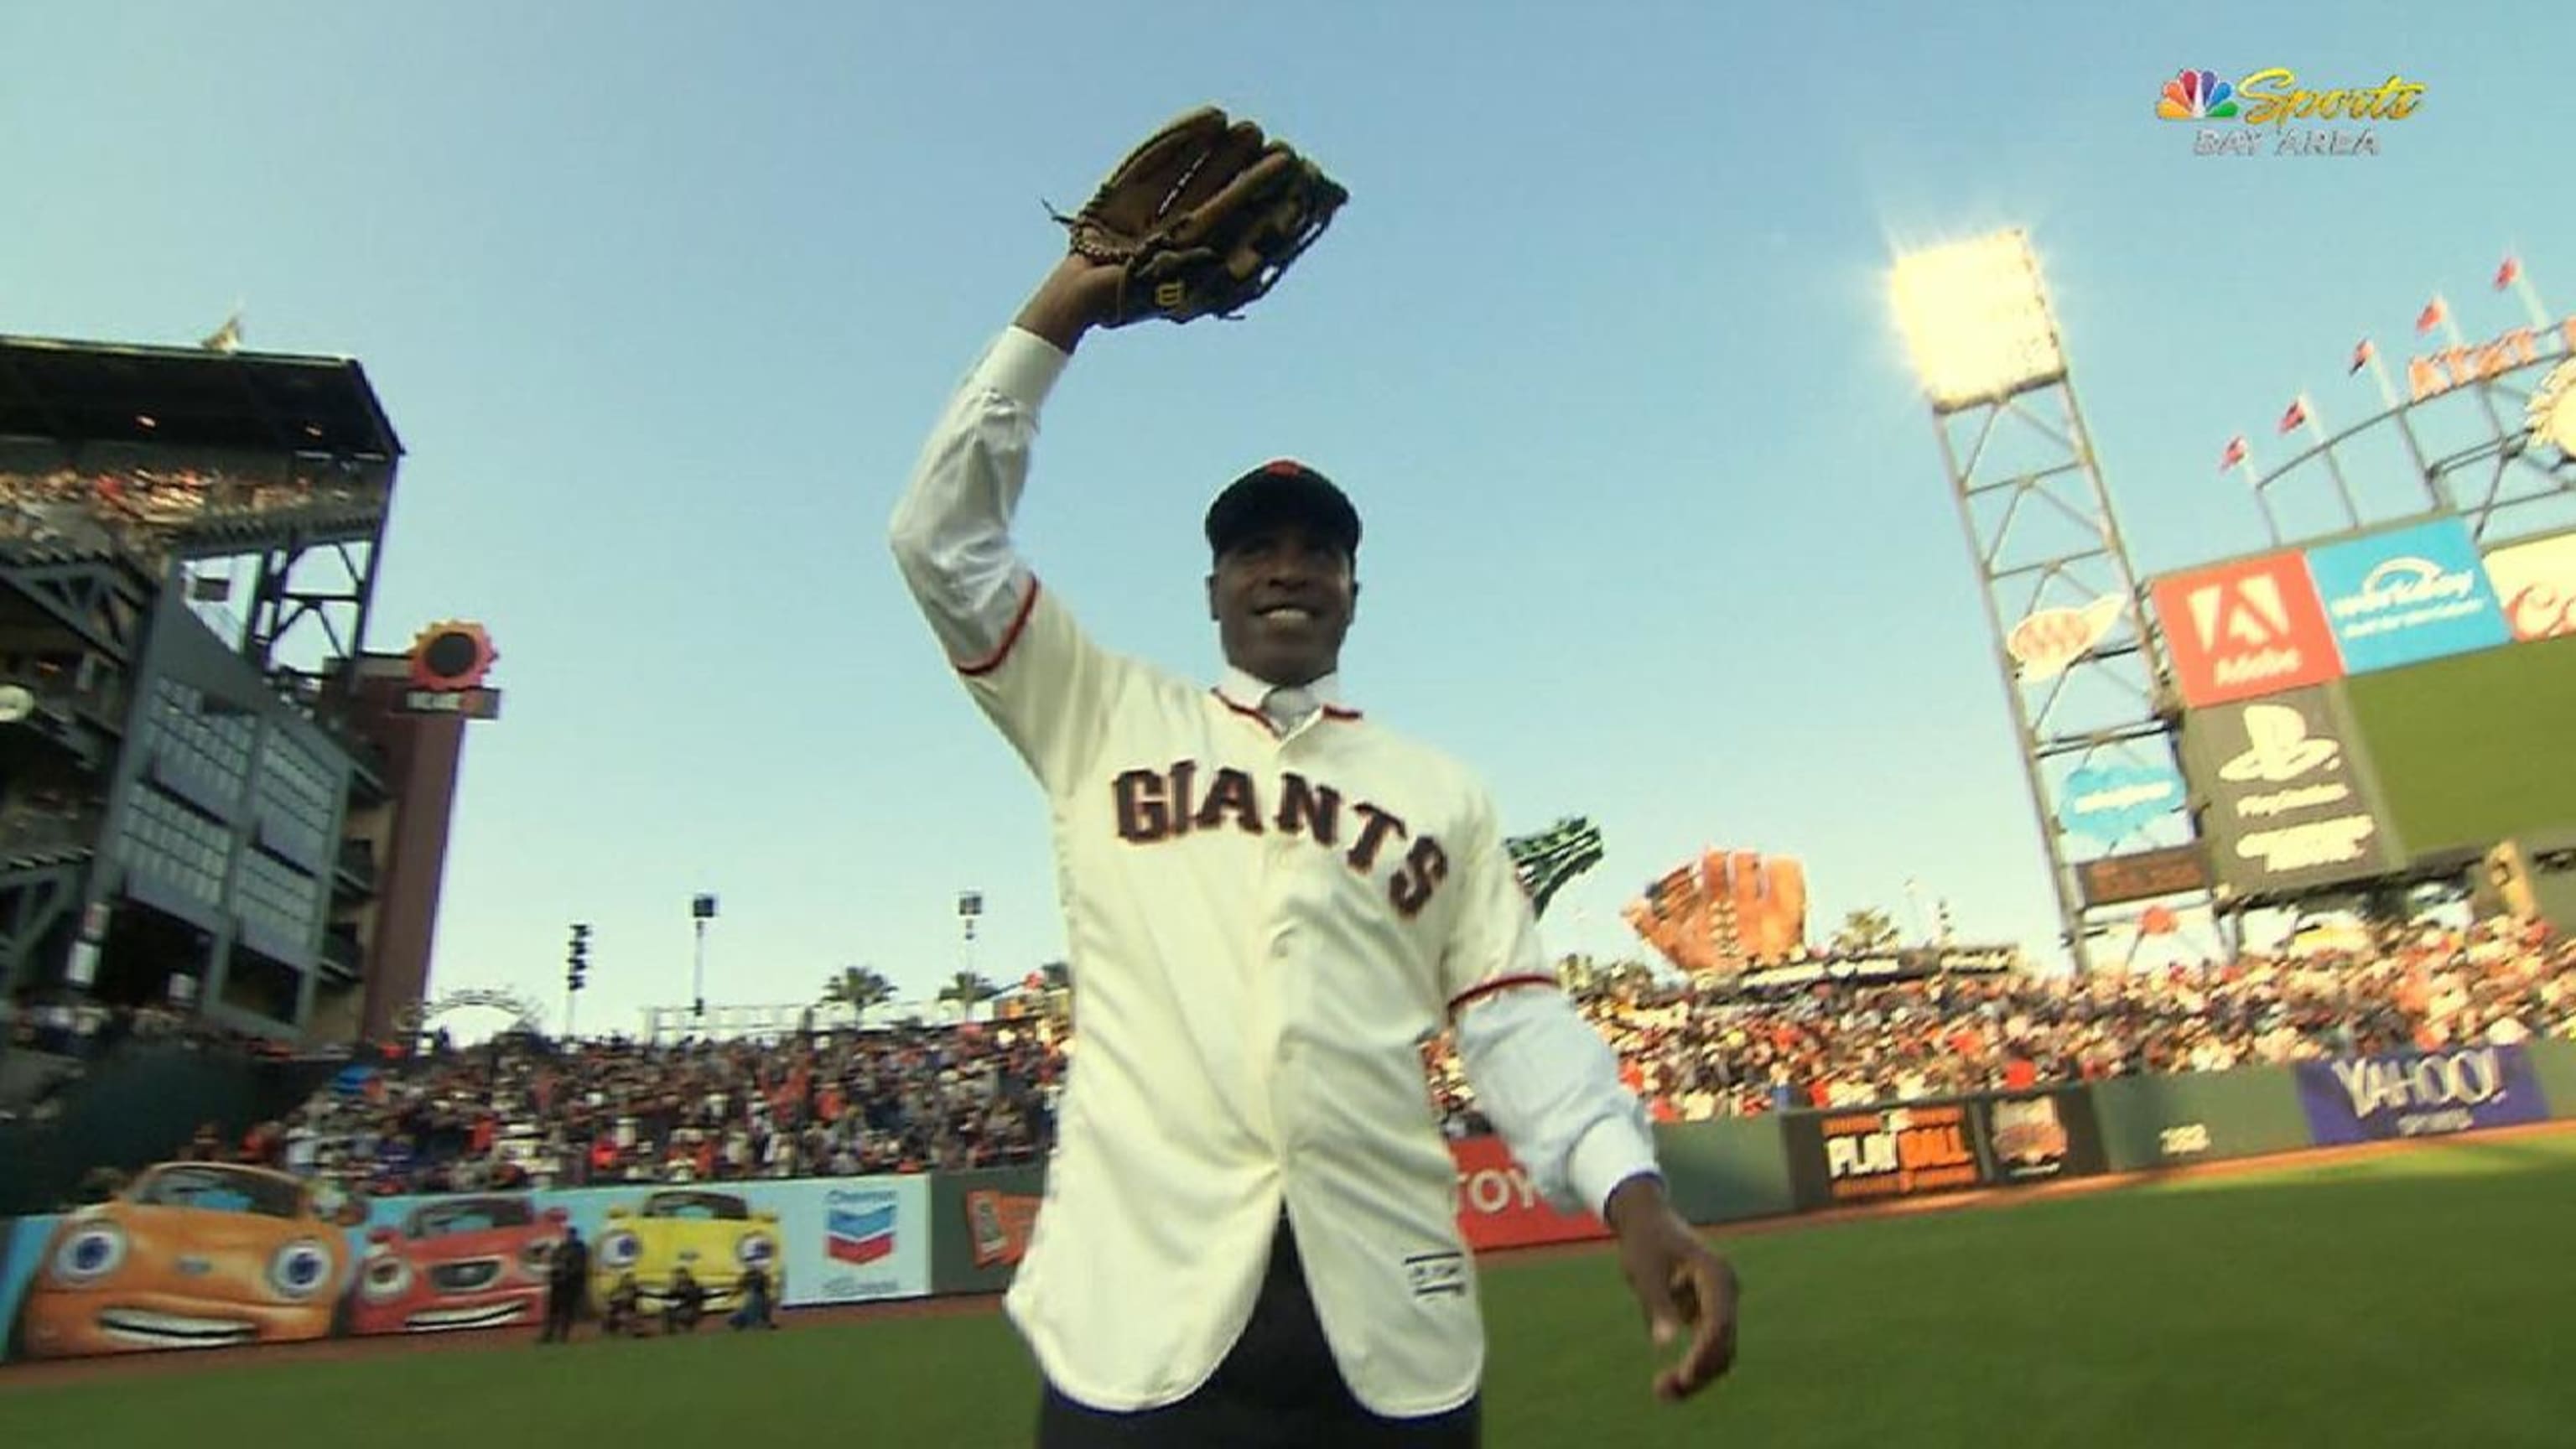 Commentary: It's time for Giants to retire Barry Bonds' number